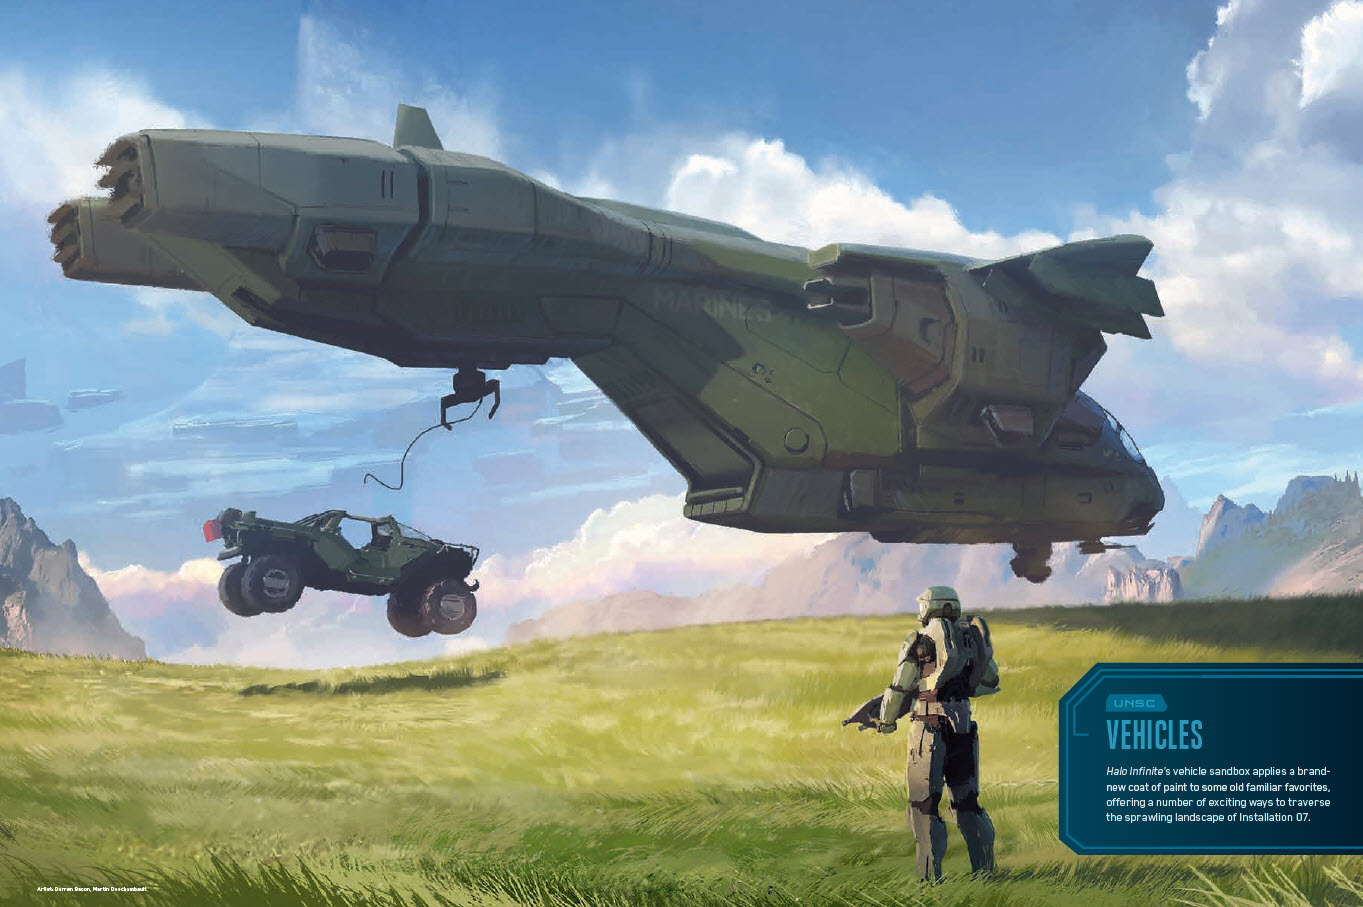 Concept art of UNSC Pelican dropping off a vehicle